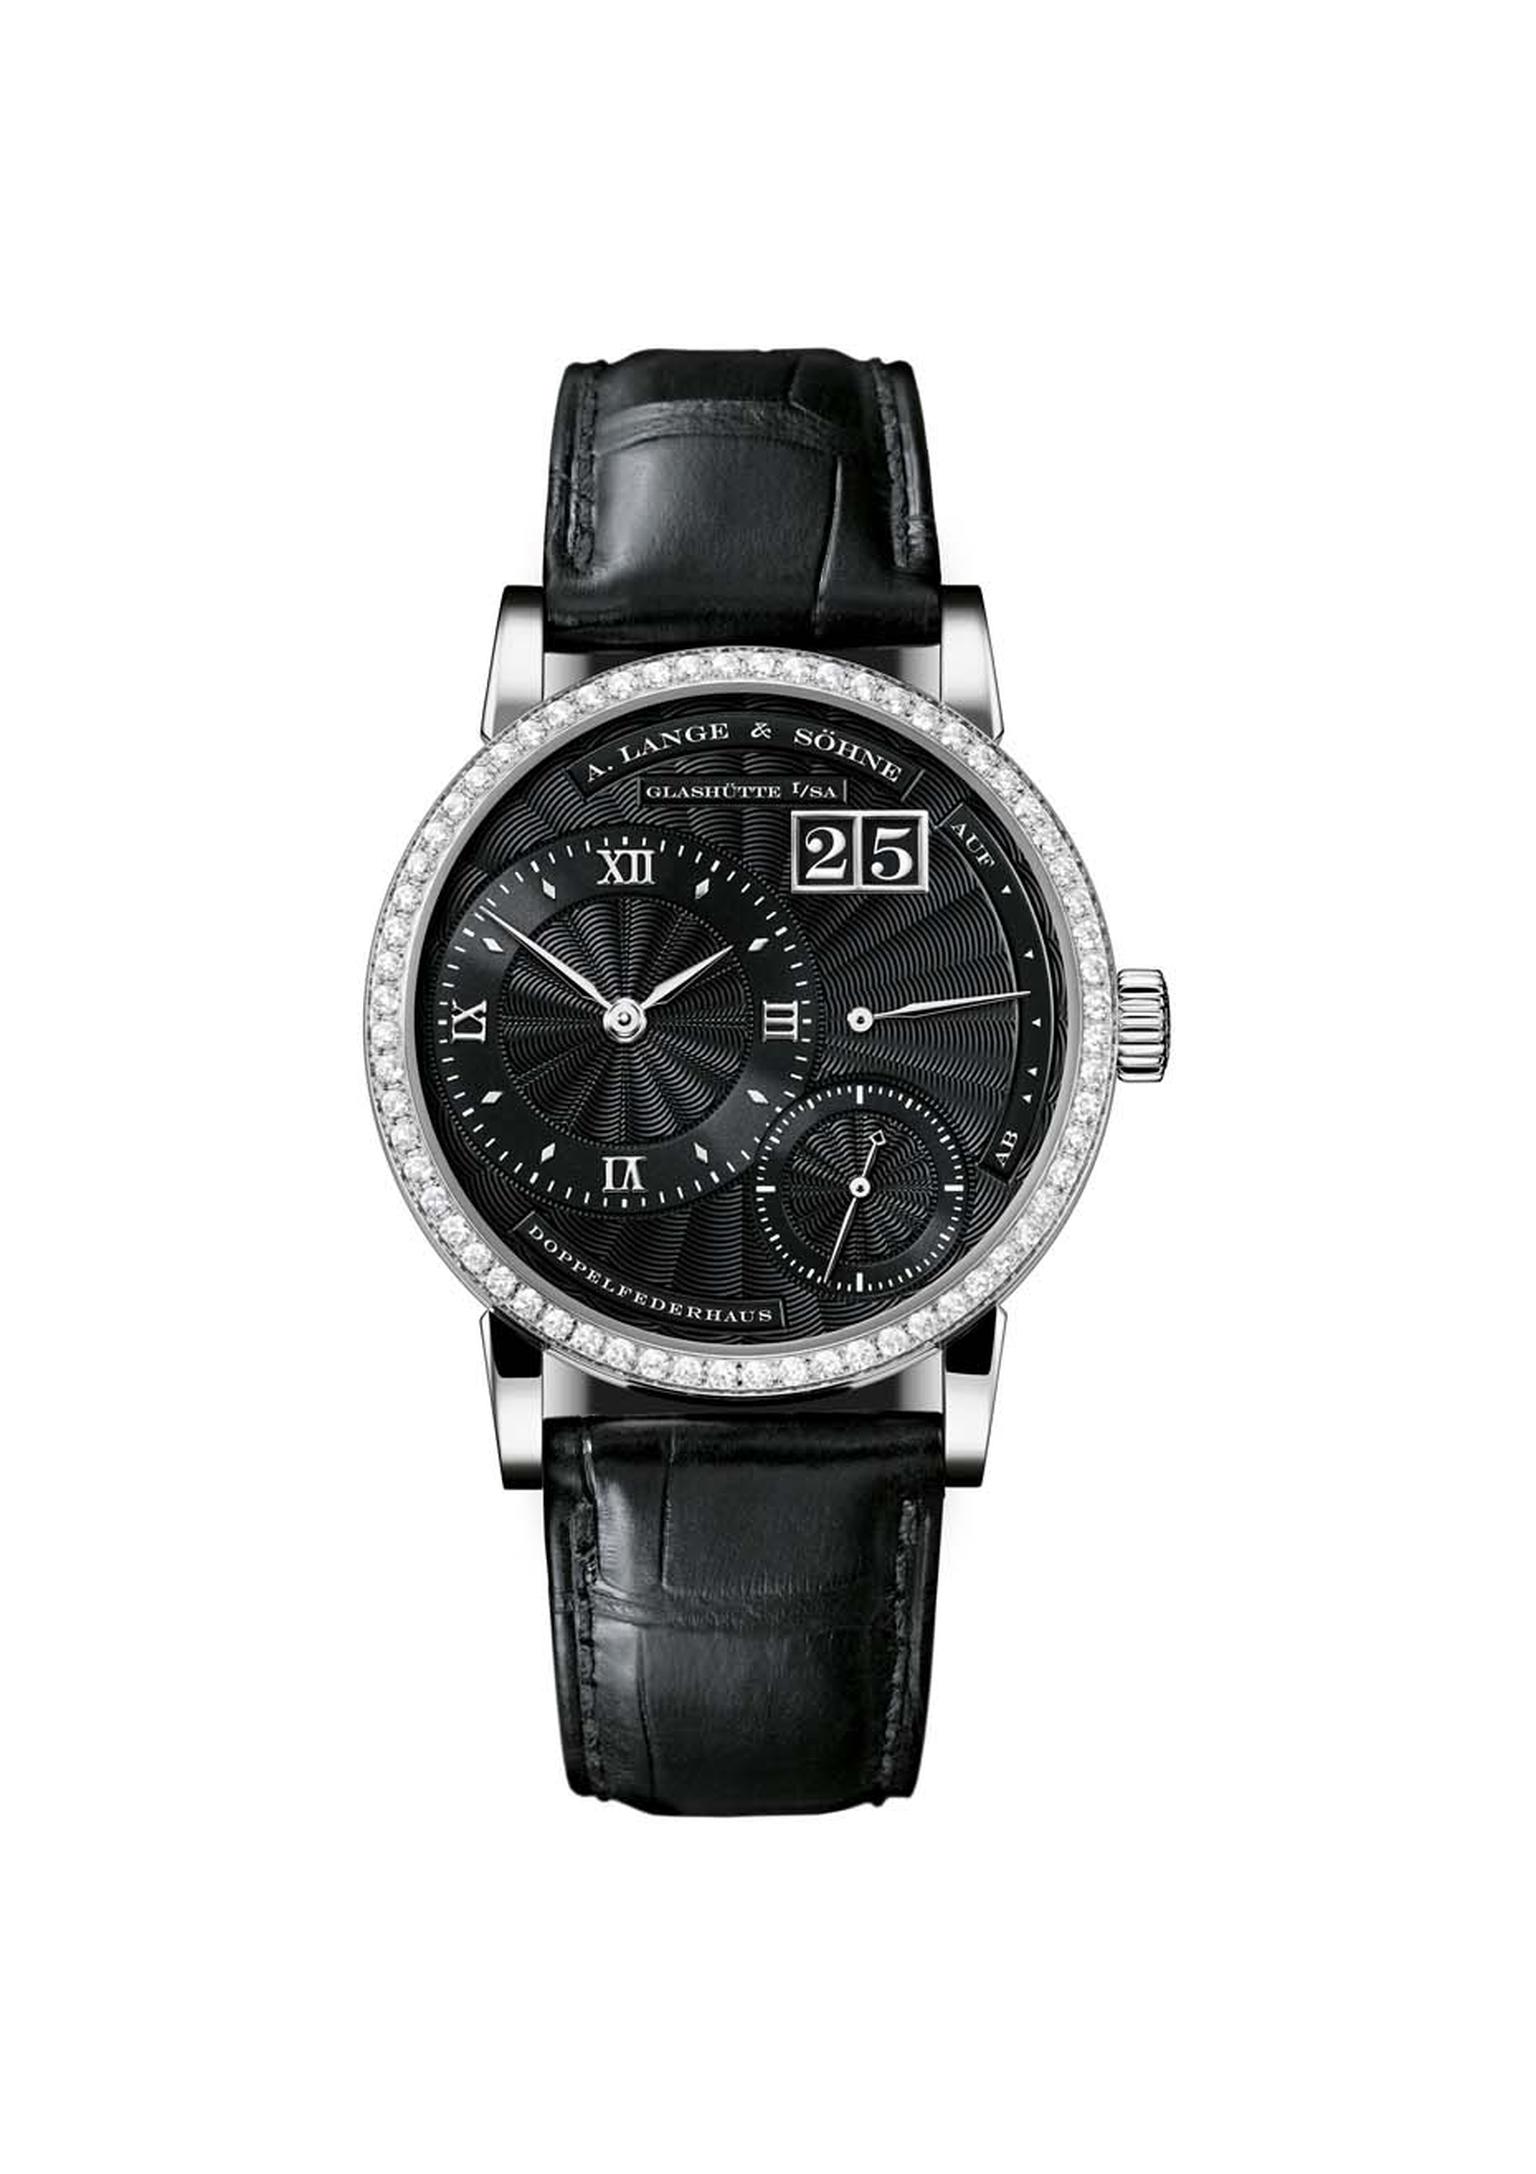 The pair to the A.Lange & Söhne Lange 1 watch in black is the Little Lange 1 watch for women, which measures 36.1mm across and has a diamond-set bezel.